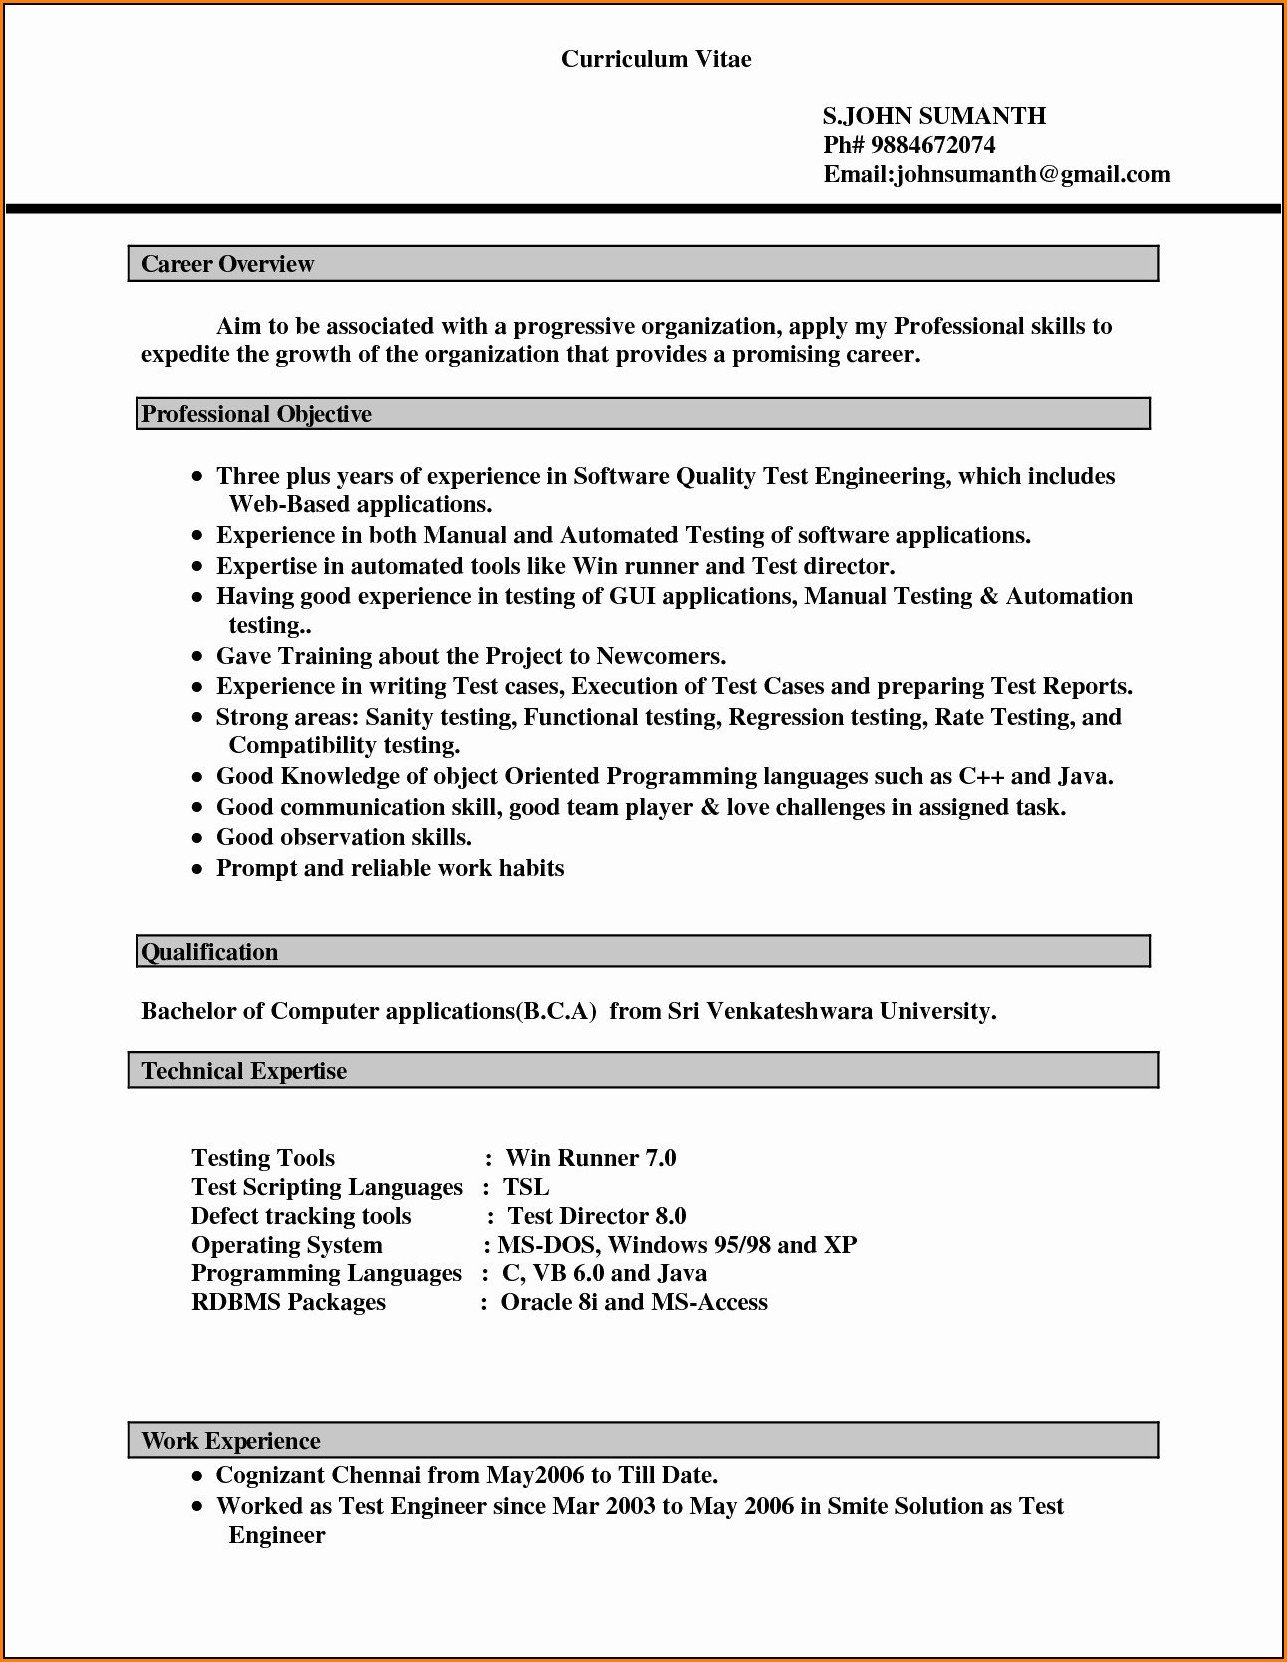 Resume Formats In Word Free Download